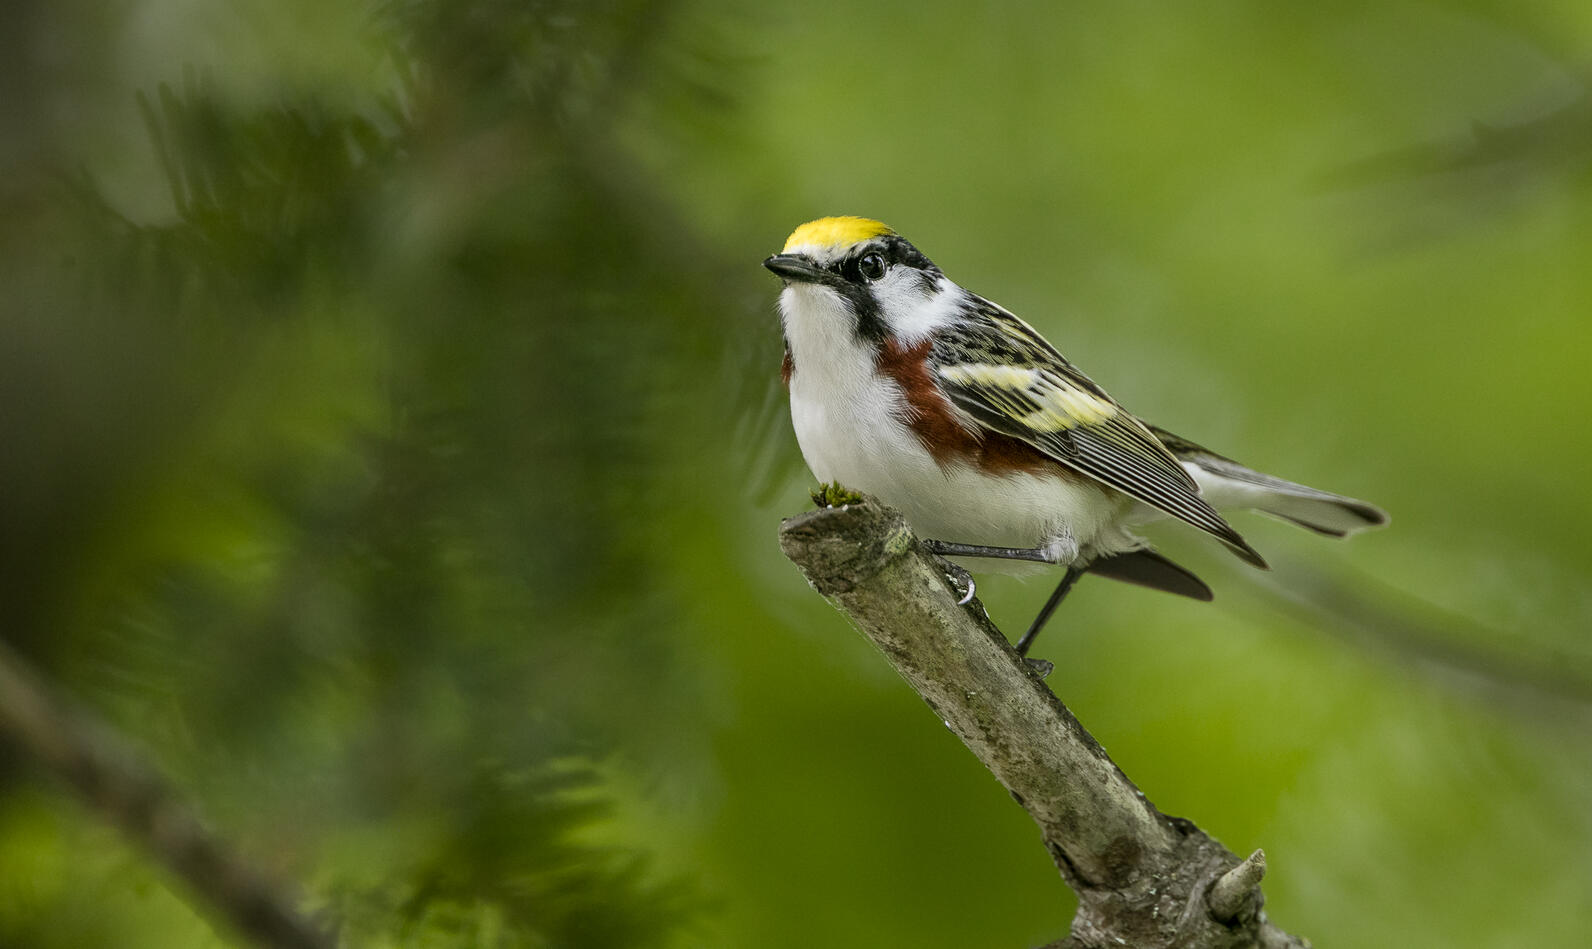 A Chestnut-sided Warbler perched at the tip of branch.